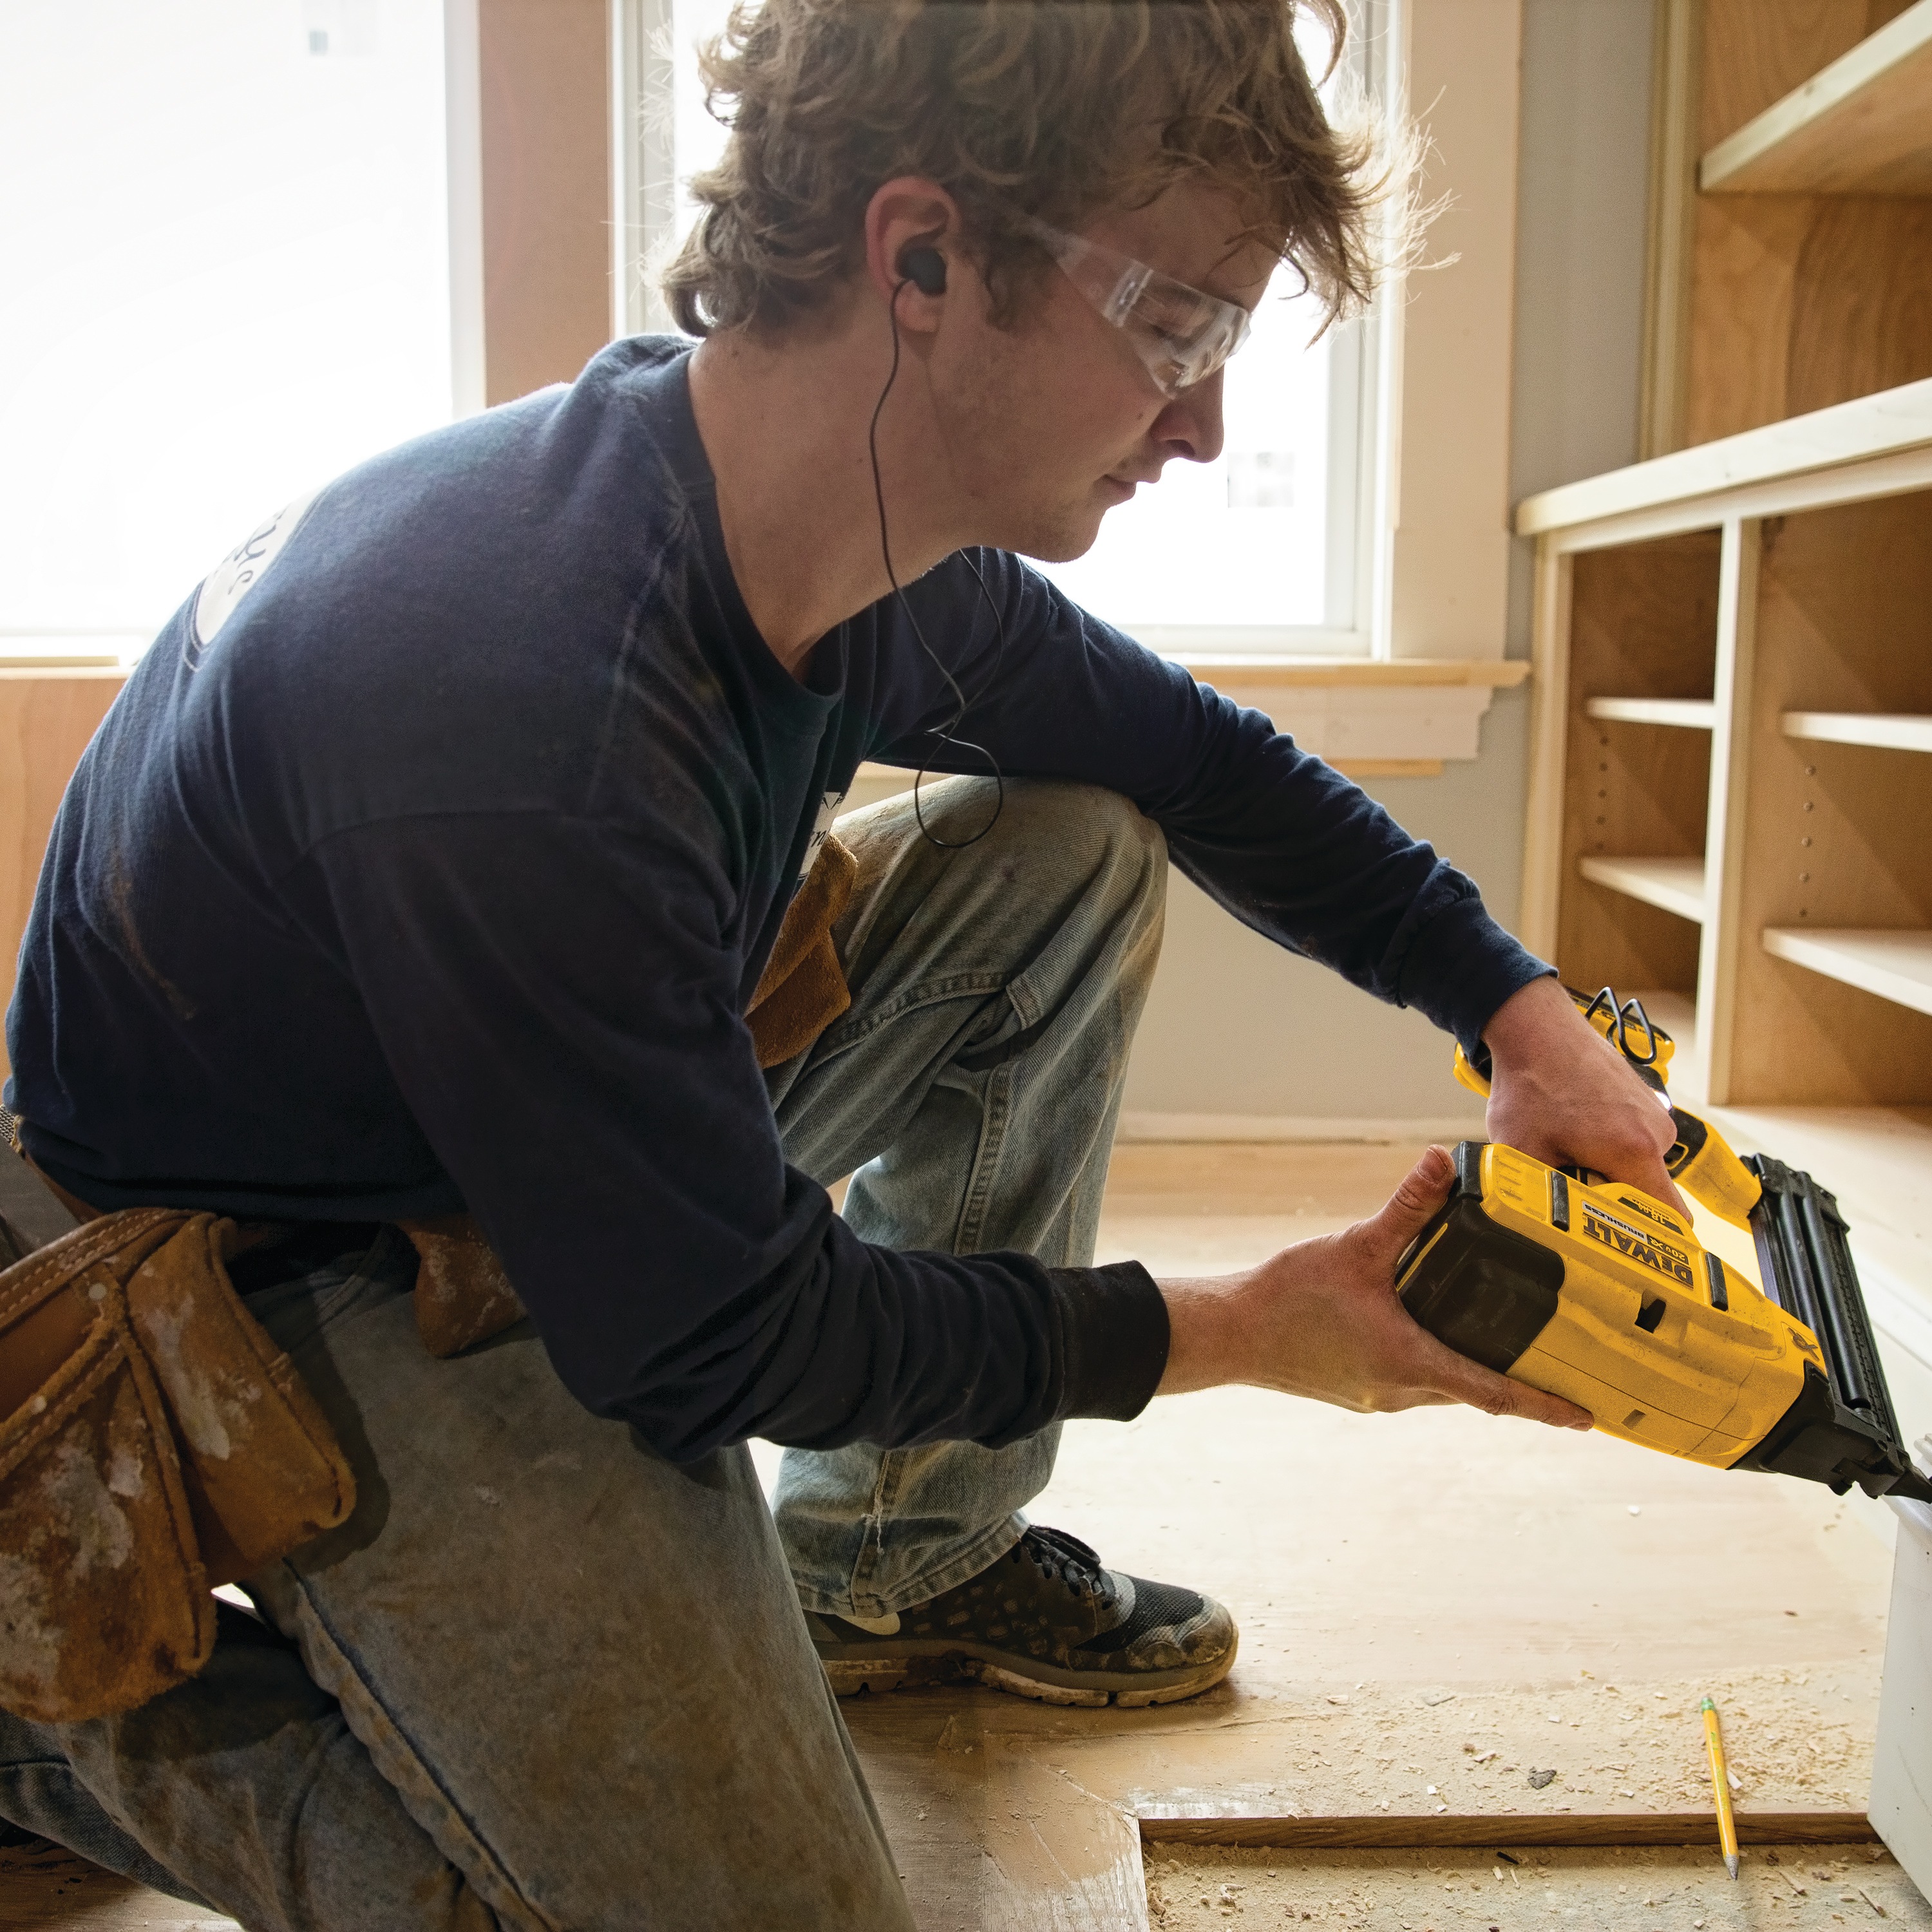 XR 18 gauge Cordless Brad Nailer in action by construction worker on a wooden cabinet at a construction site